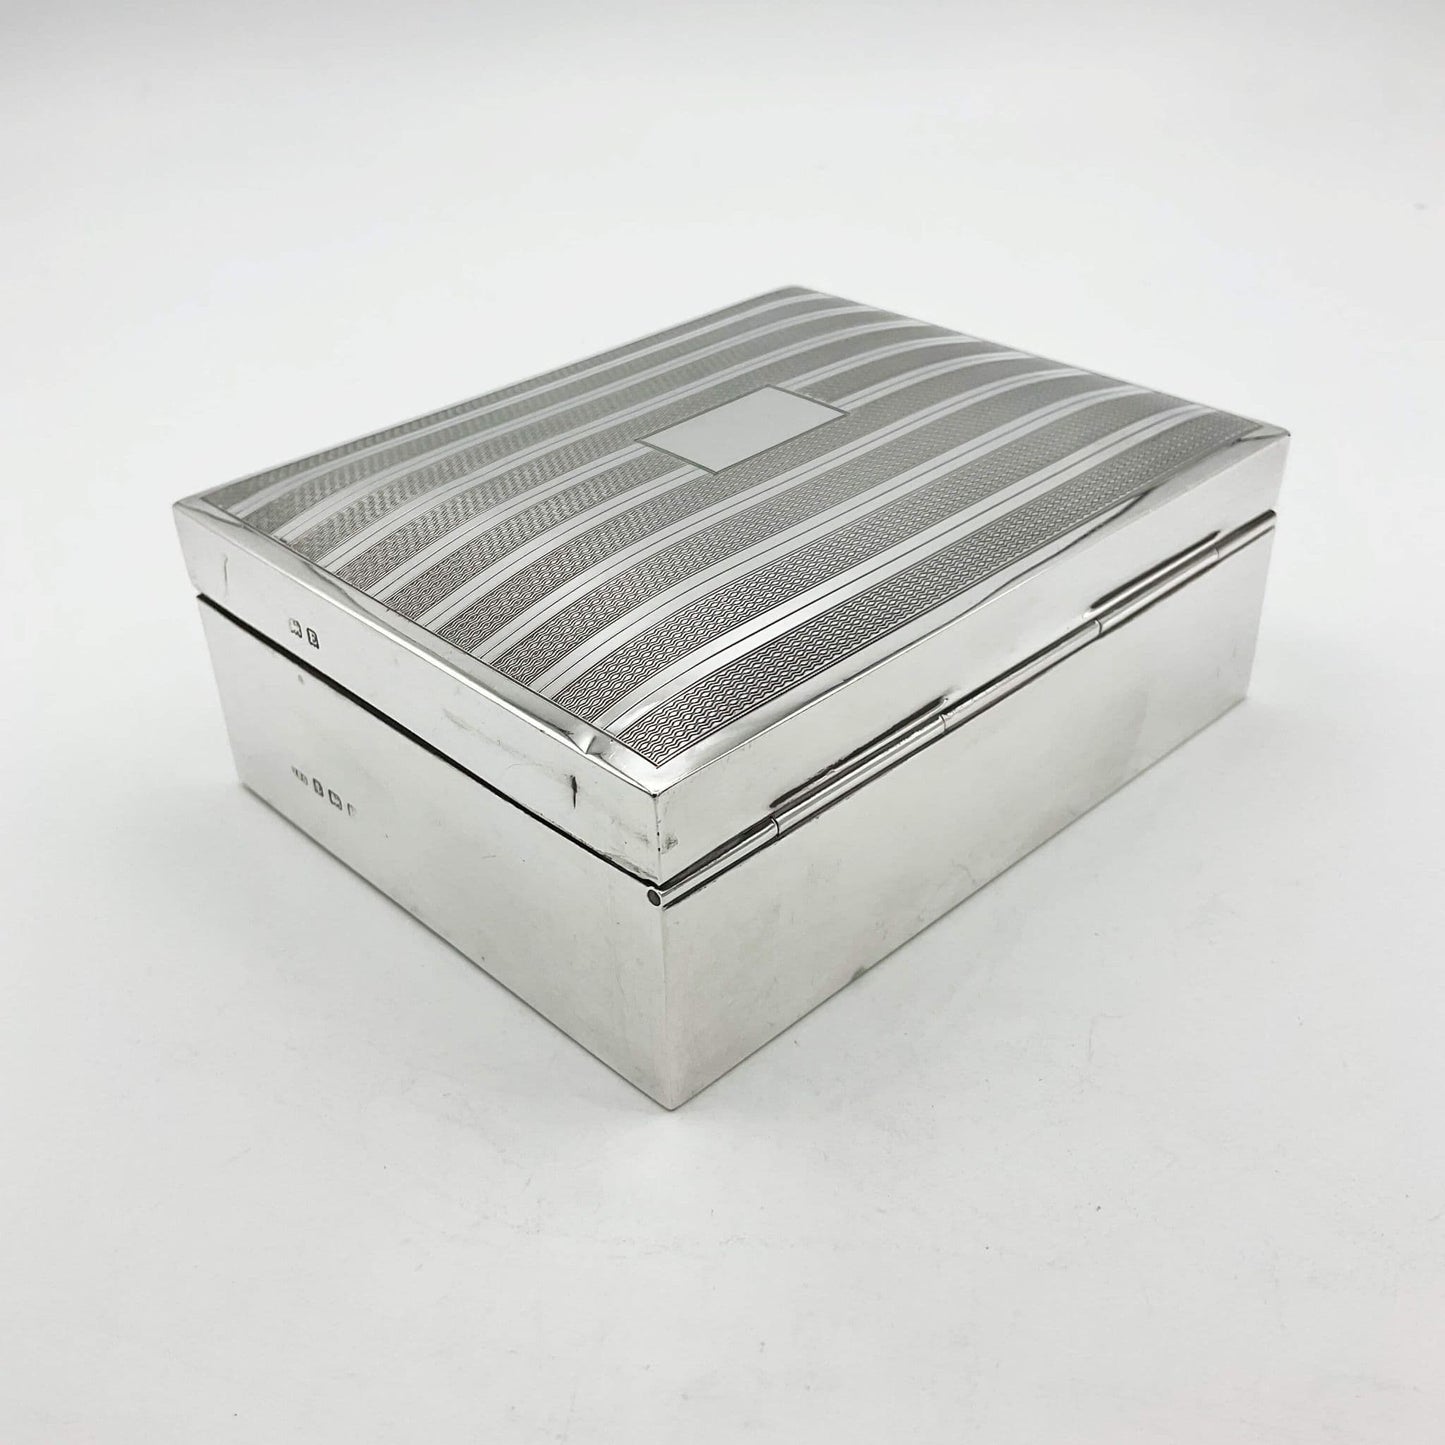 back view showing the hinge of the vintage silver cigarette box